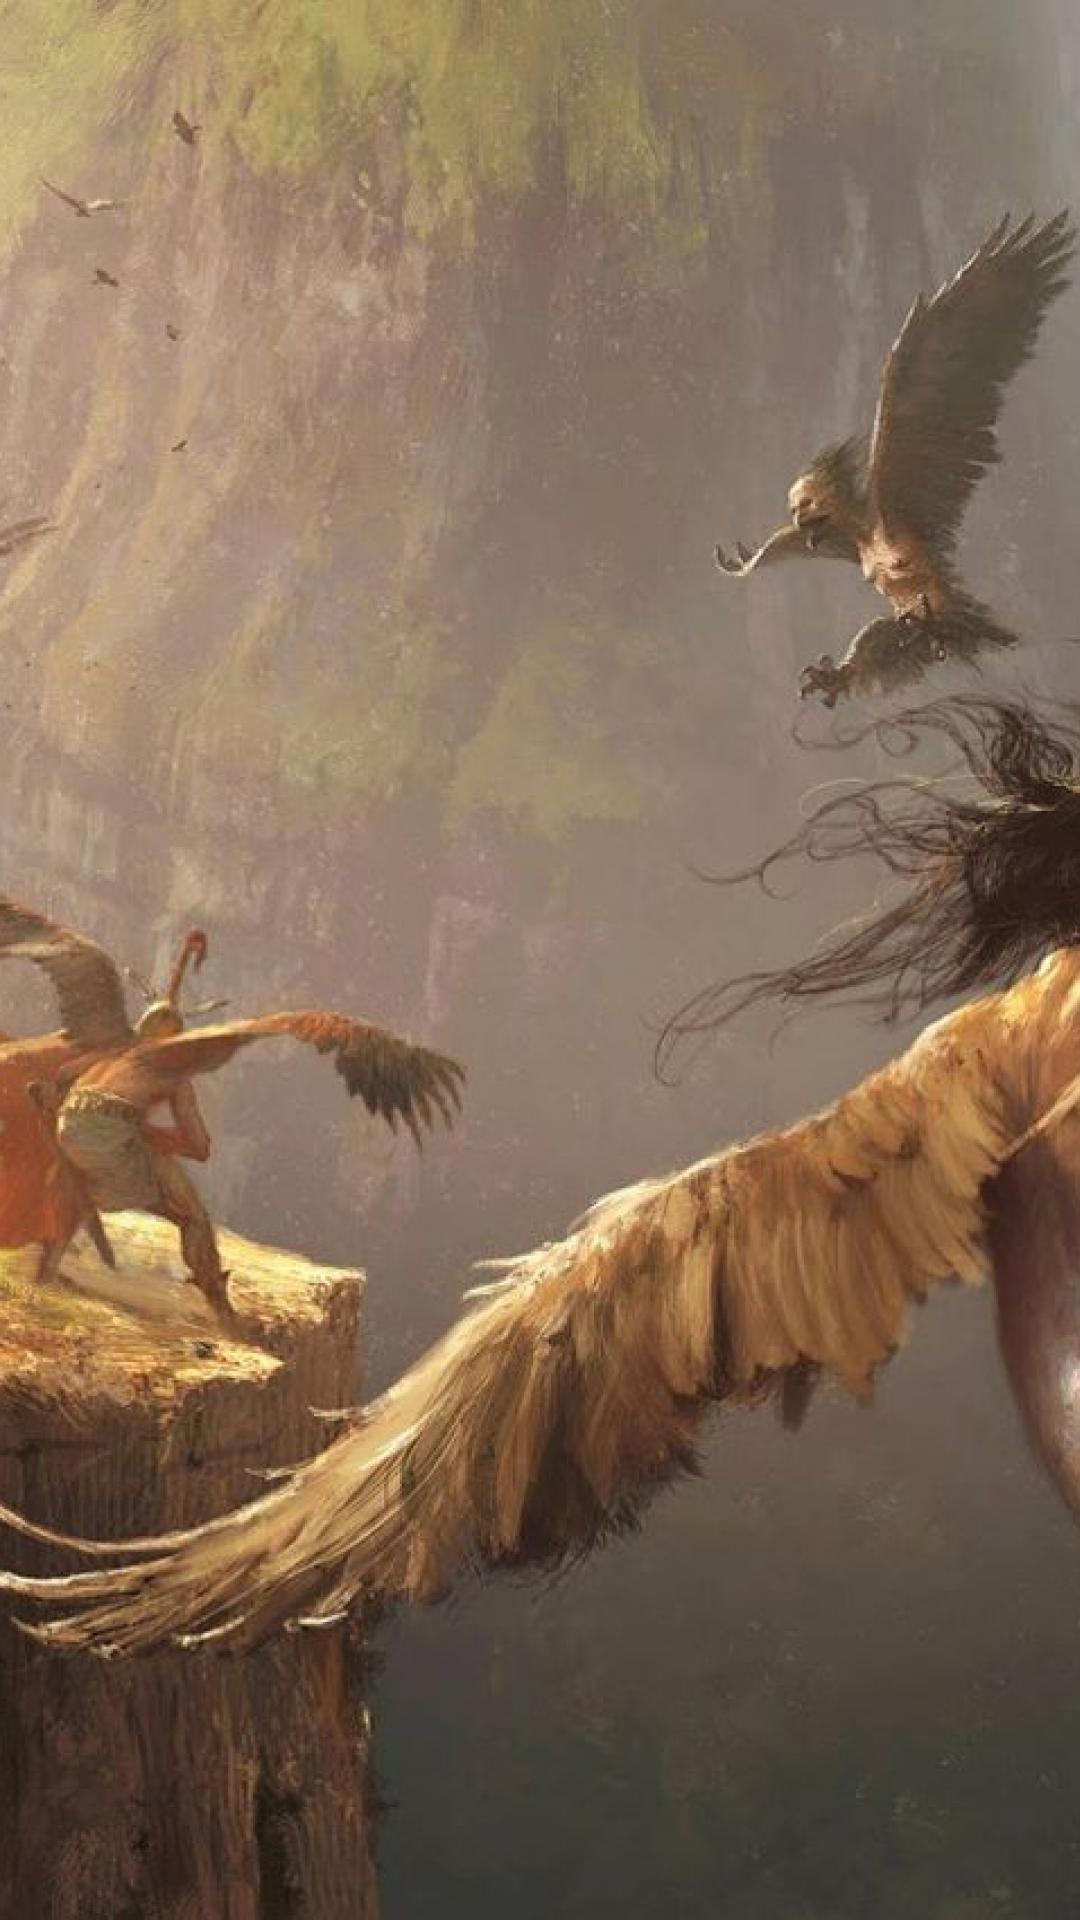 The image is a painting of an eagle flying over two people - Greek mythology